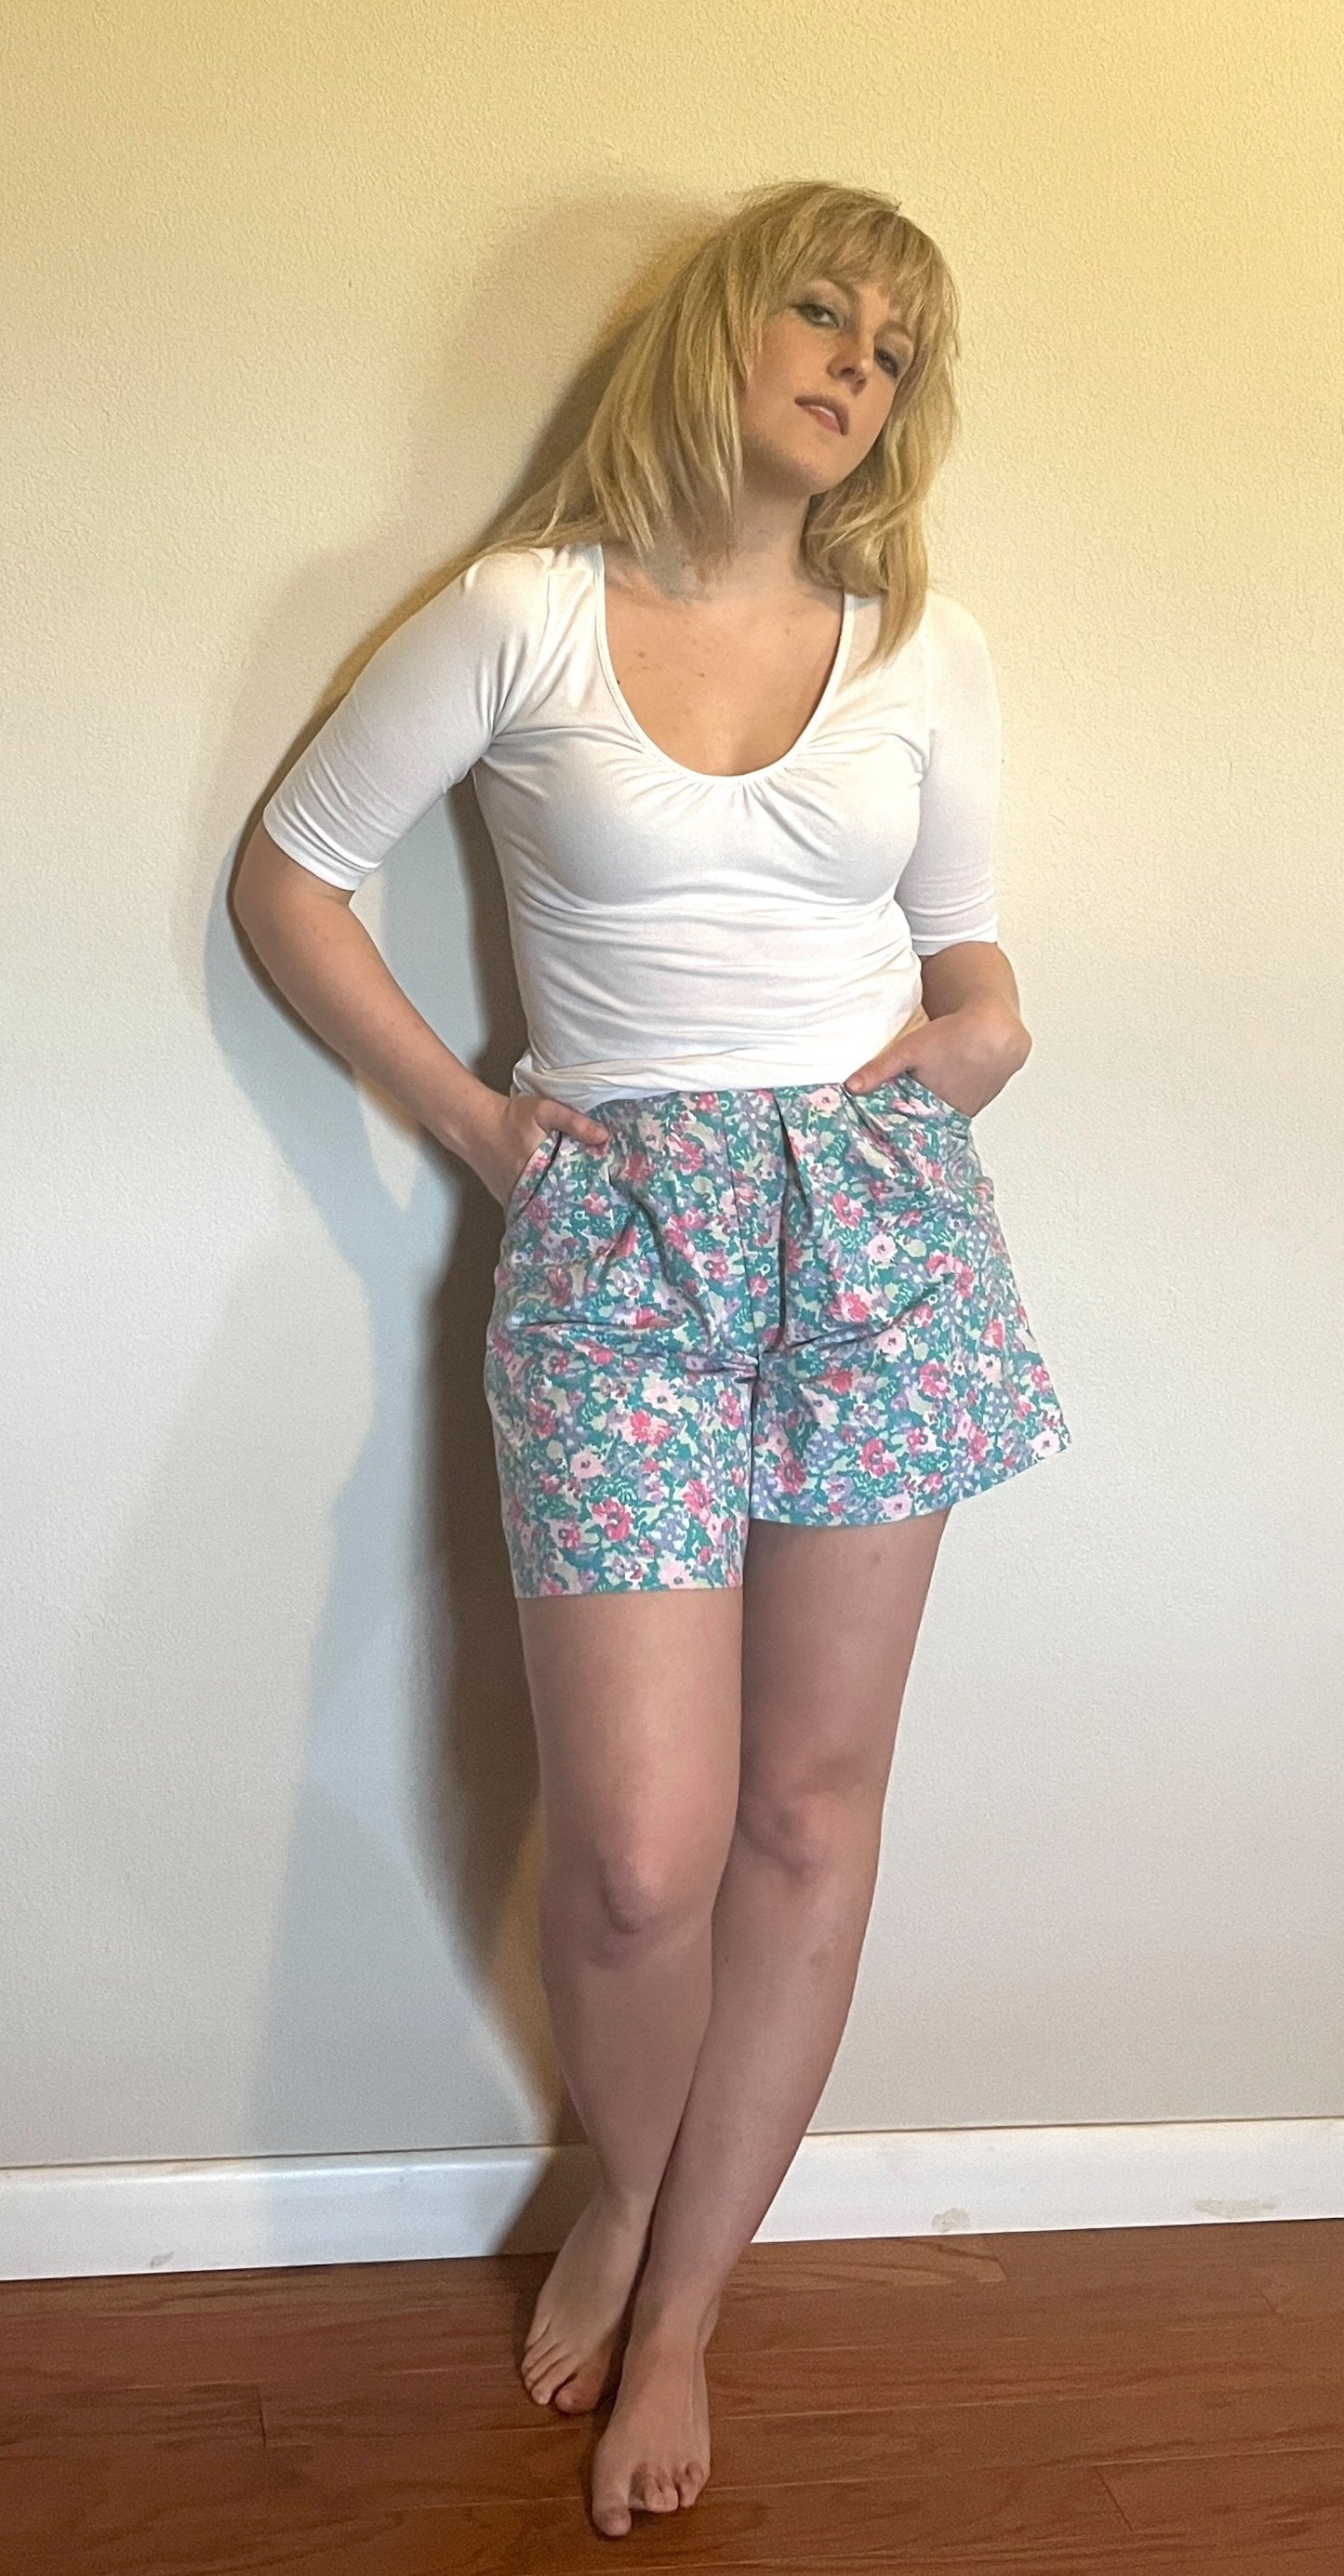 Vintage 1980's "Laura Ashley" Turquoise & Pink Floral Shorts